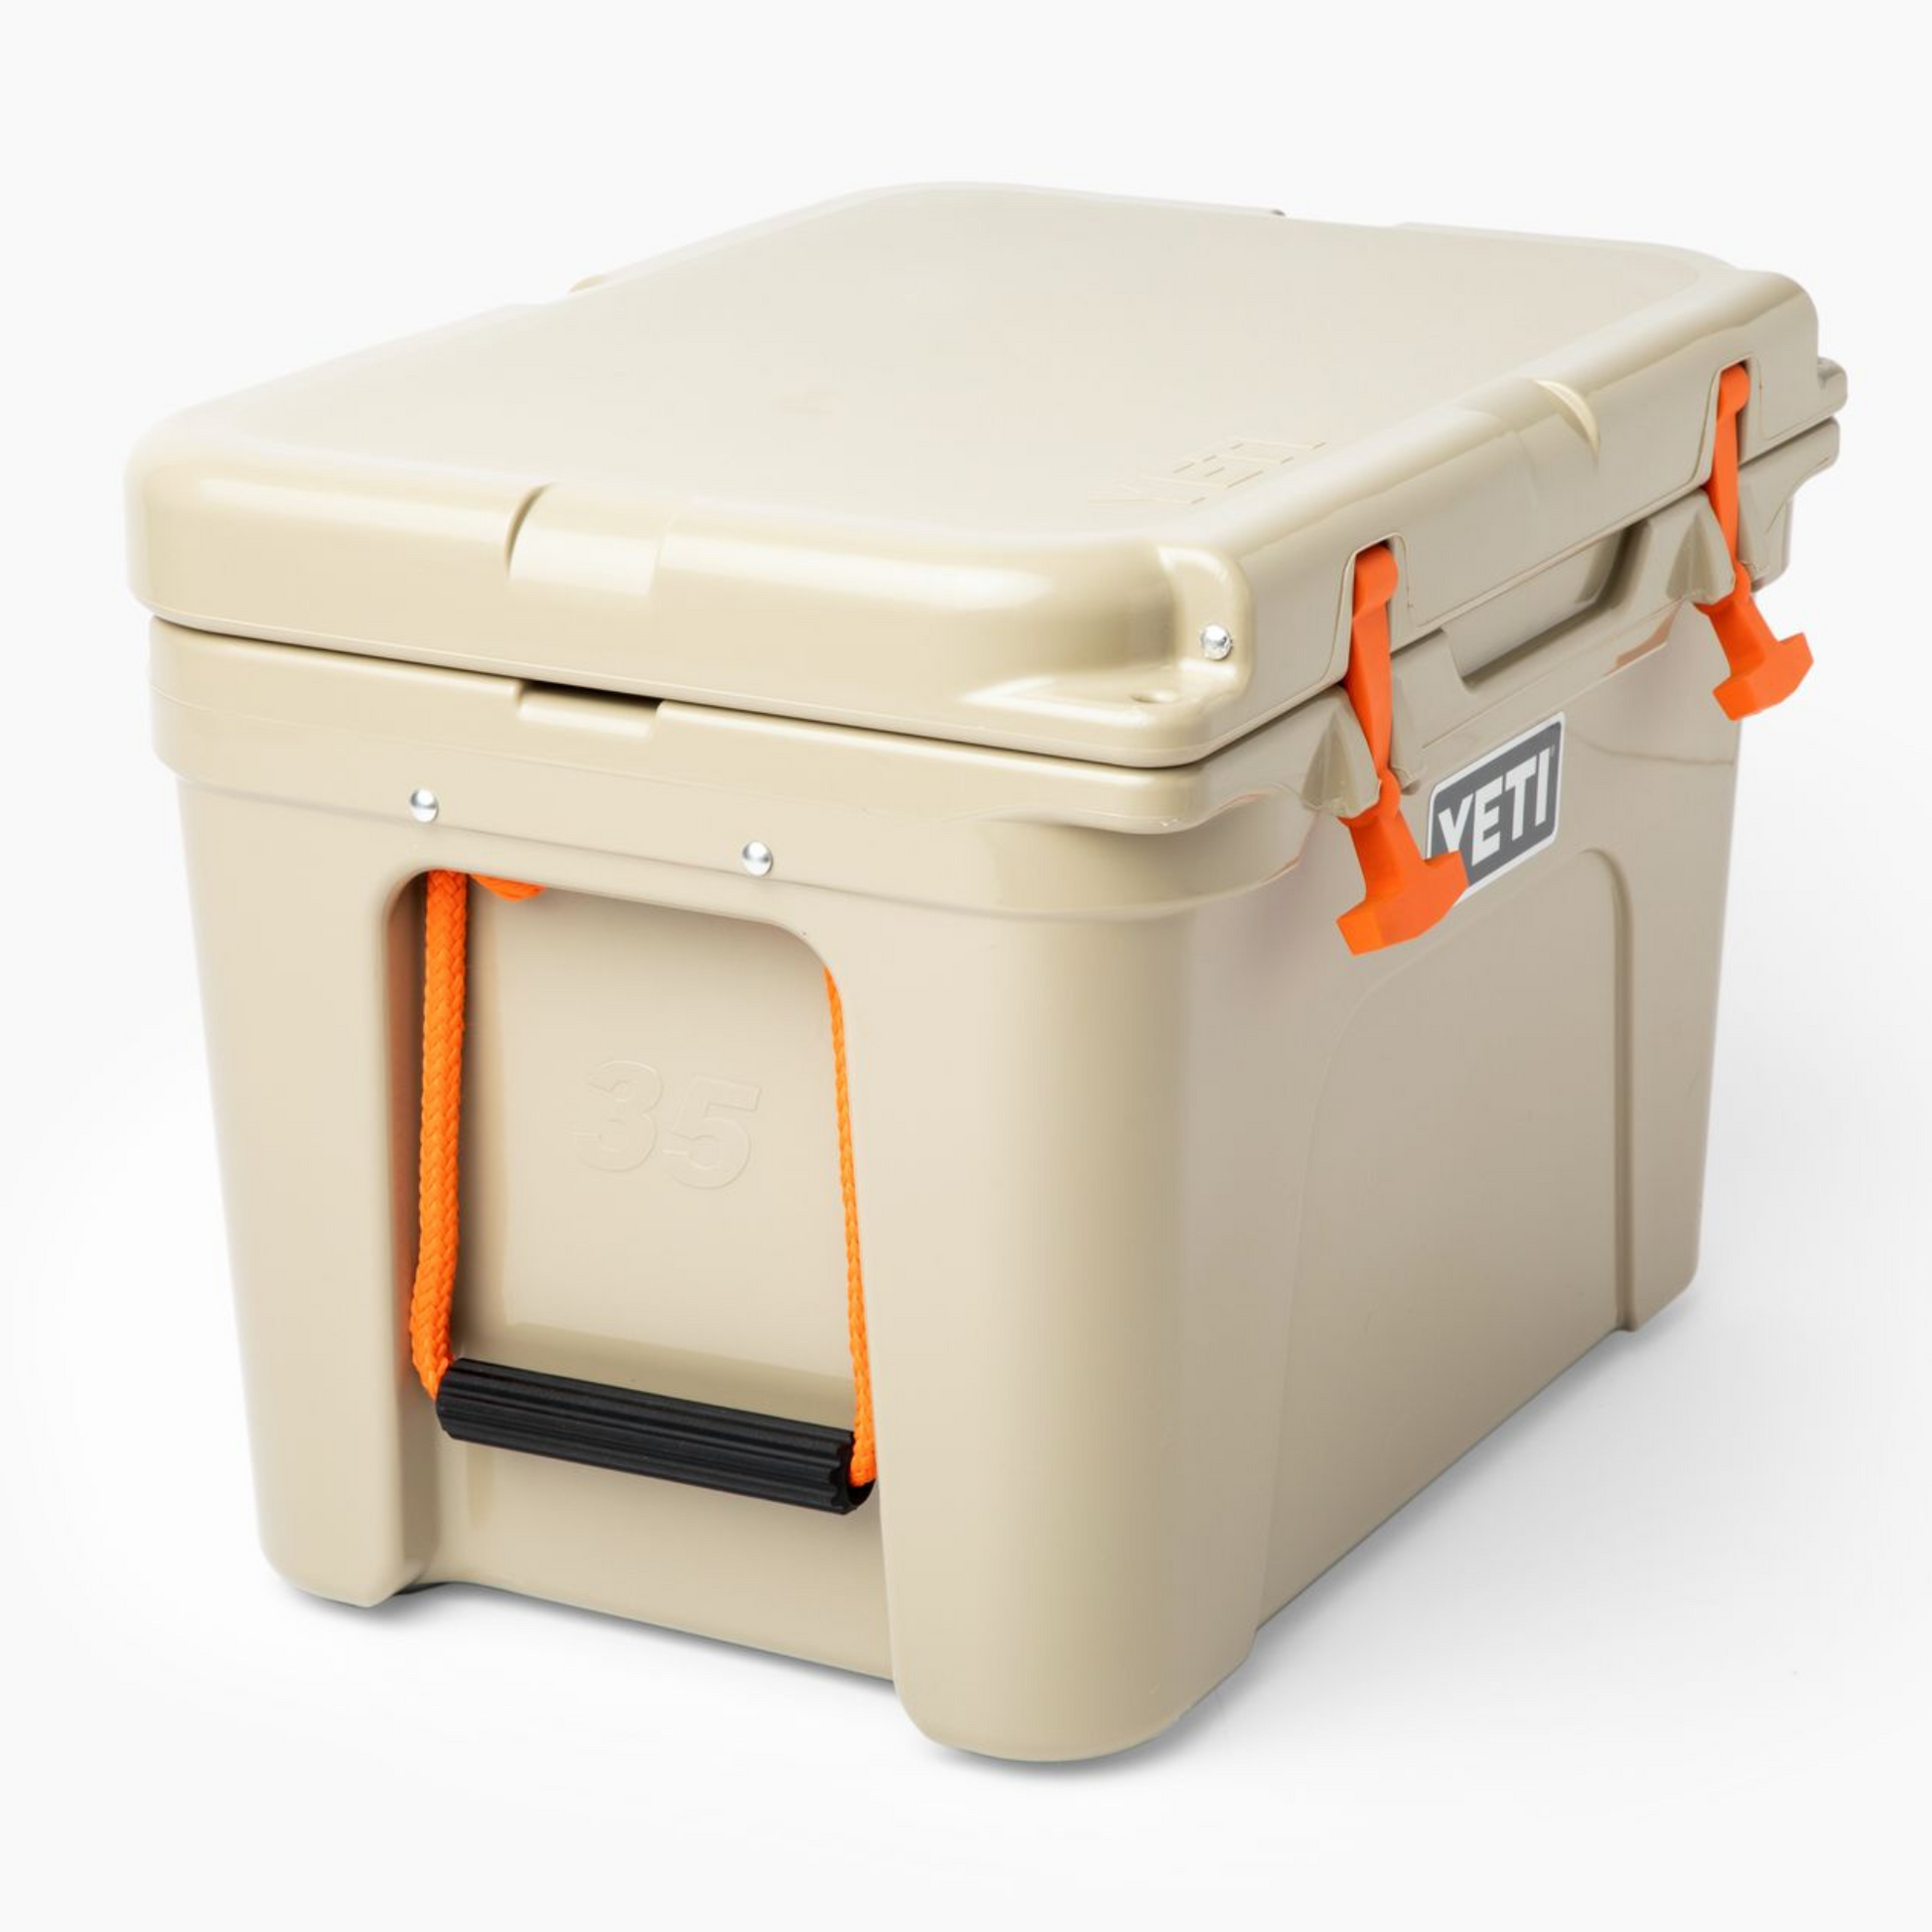 Blaze Orange Latch Kit for YETI and RTIC Coolers – Above Sea Level